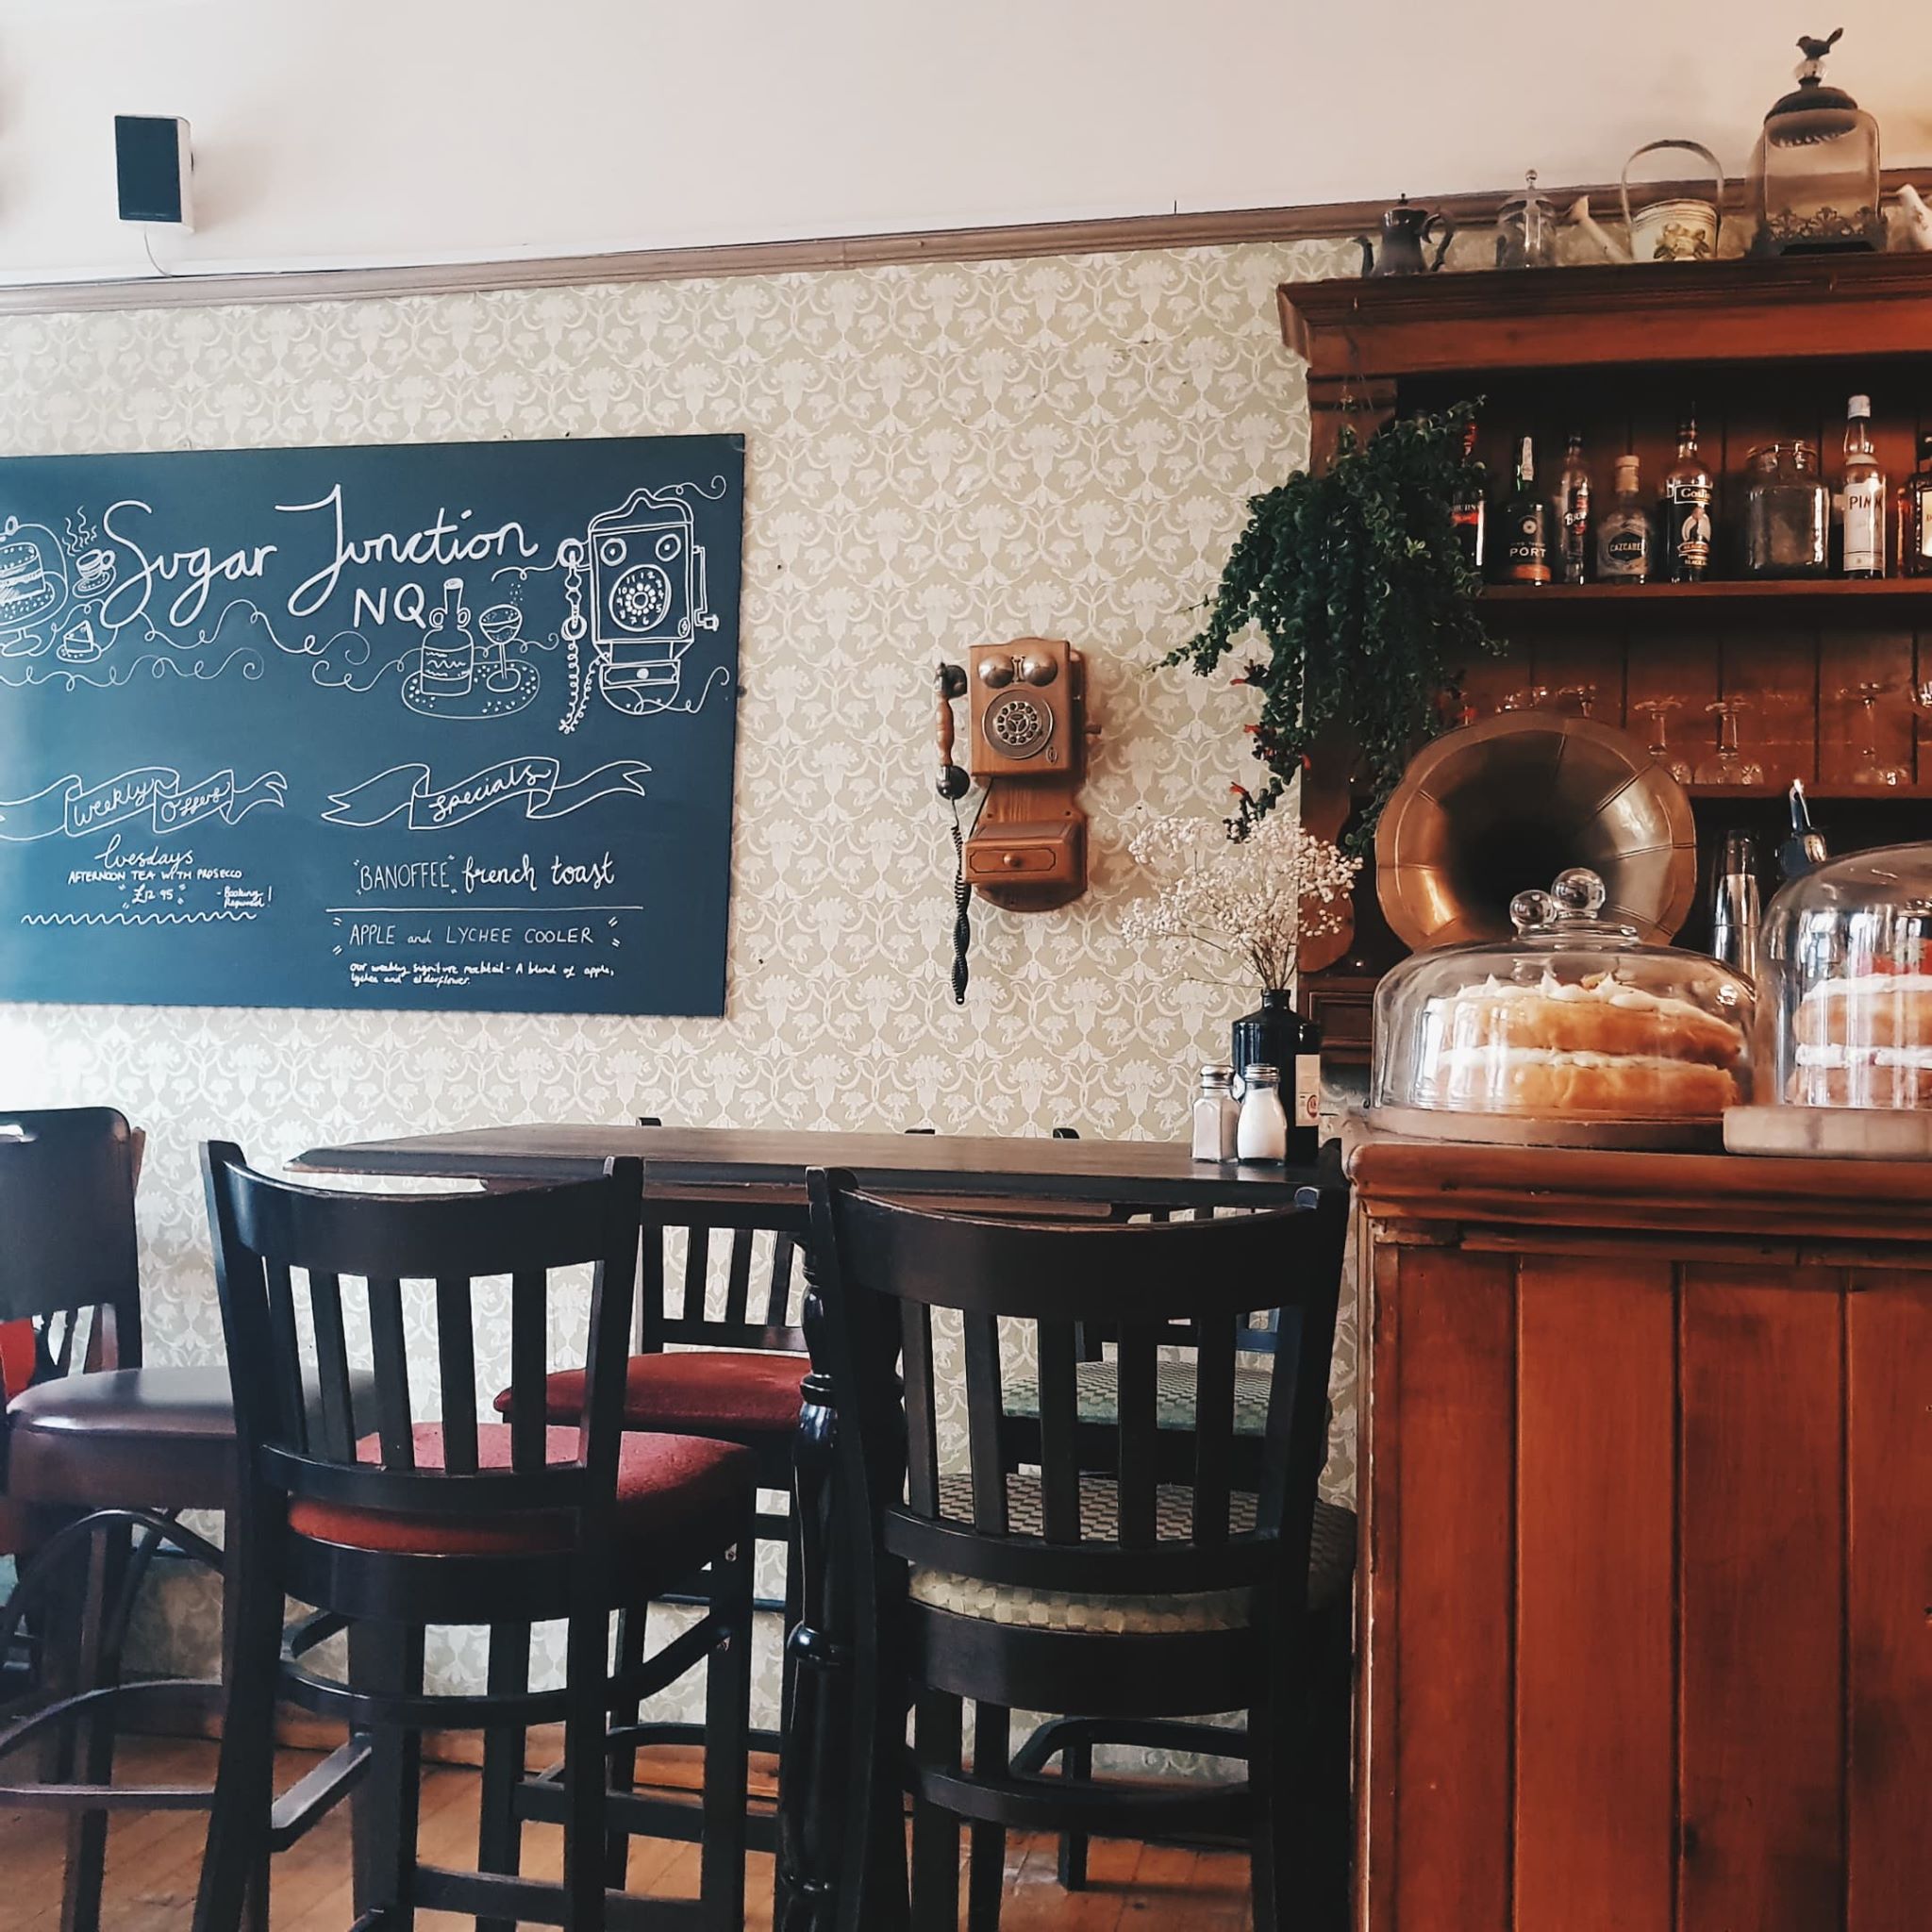 Sugar Junction interior, Manchester - What to do for a weekend in Manchester - The LDN Gal